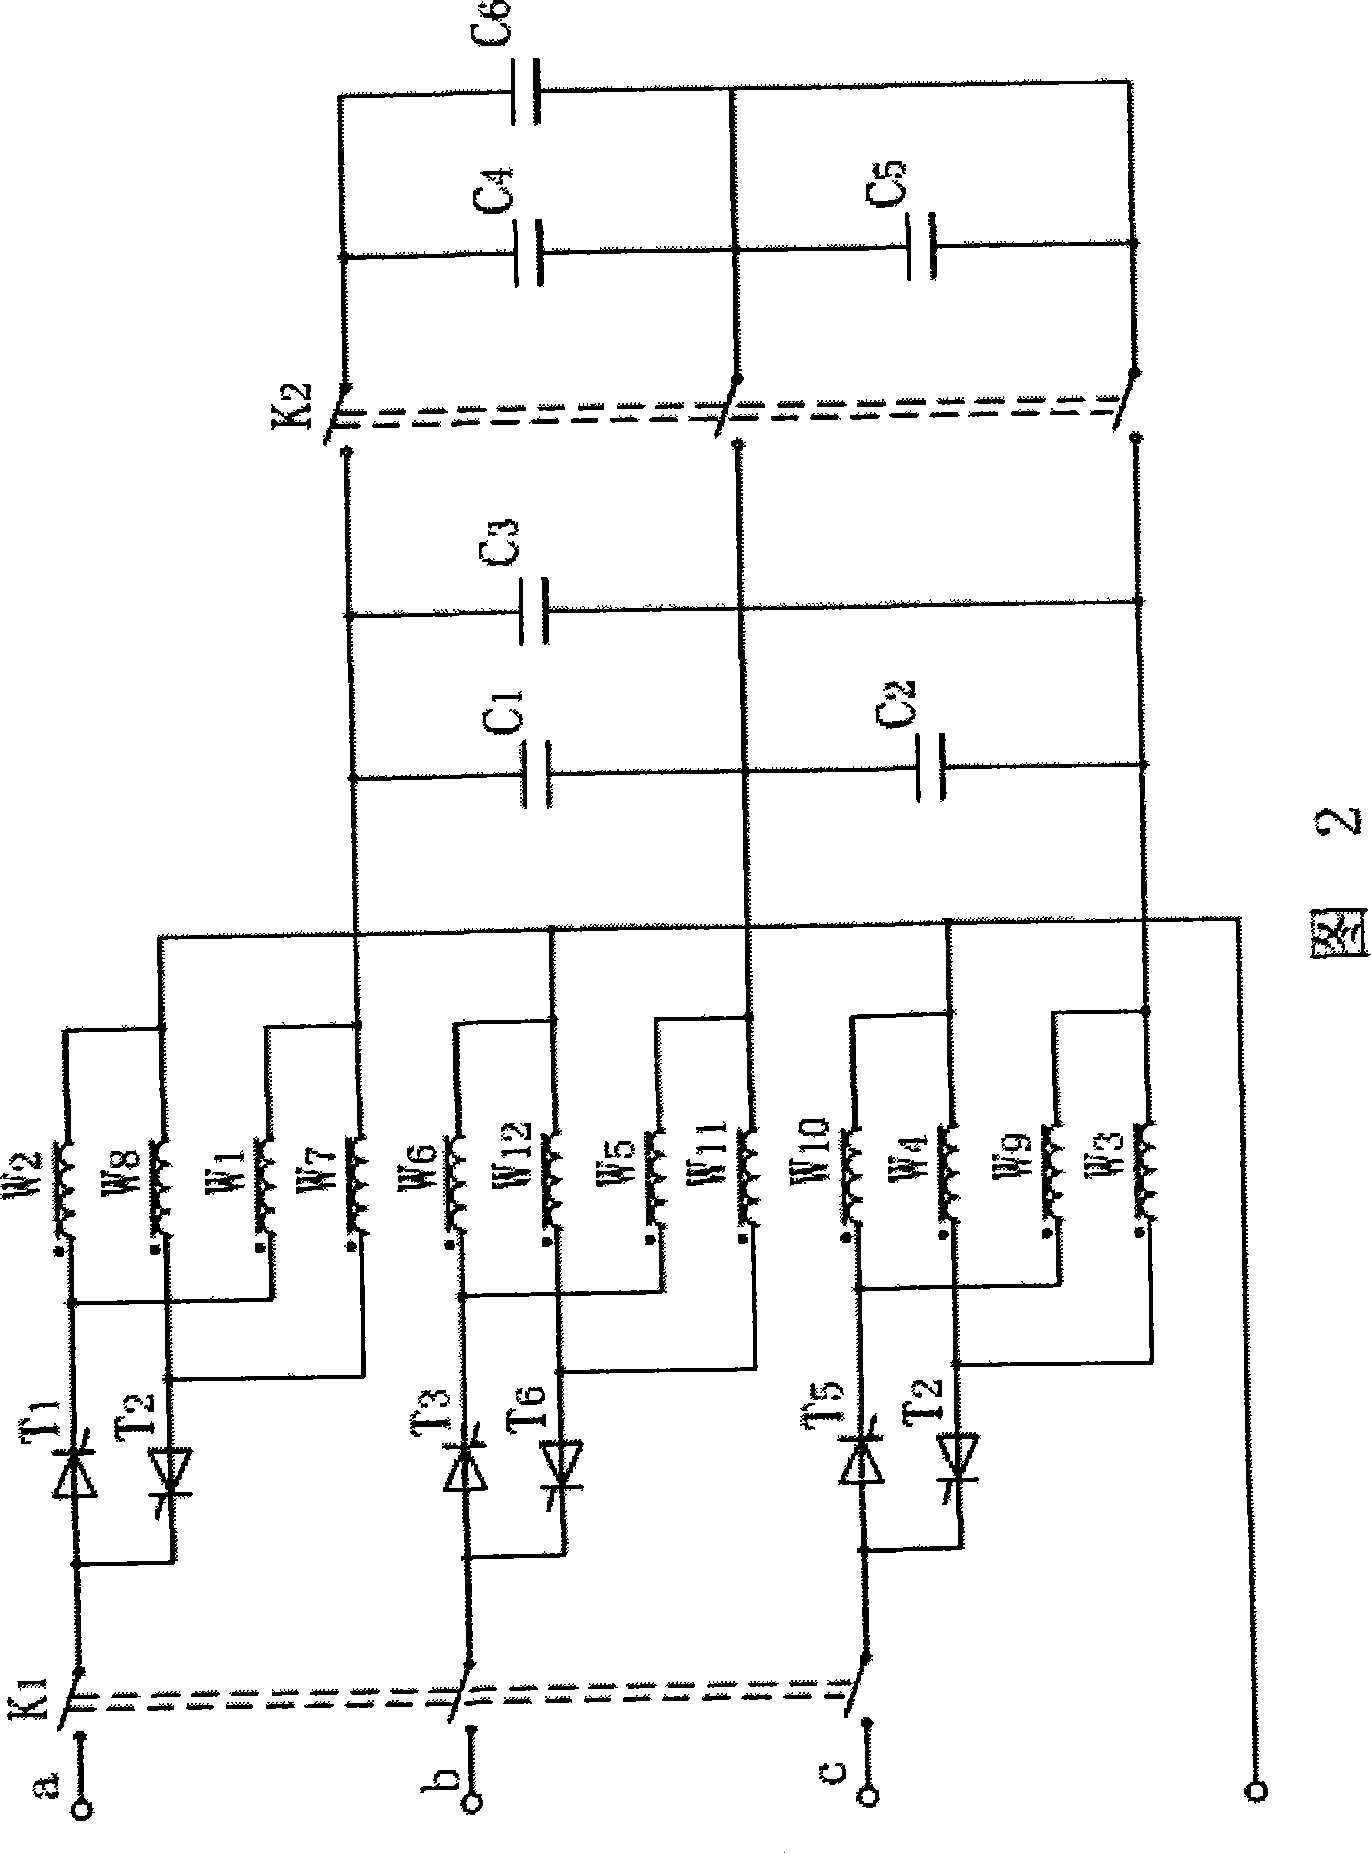 Electromagnetic combined apparatus for synthesizing stone pressure plate